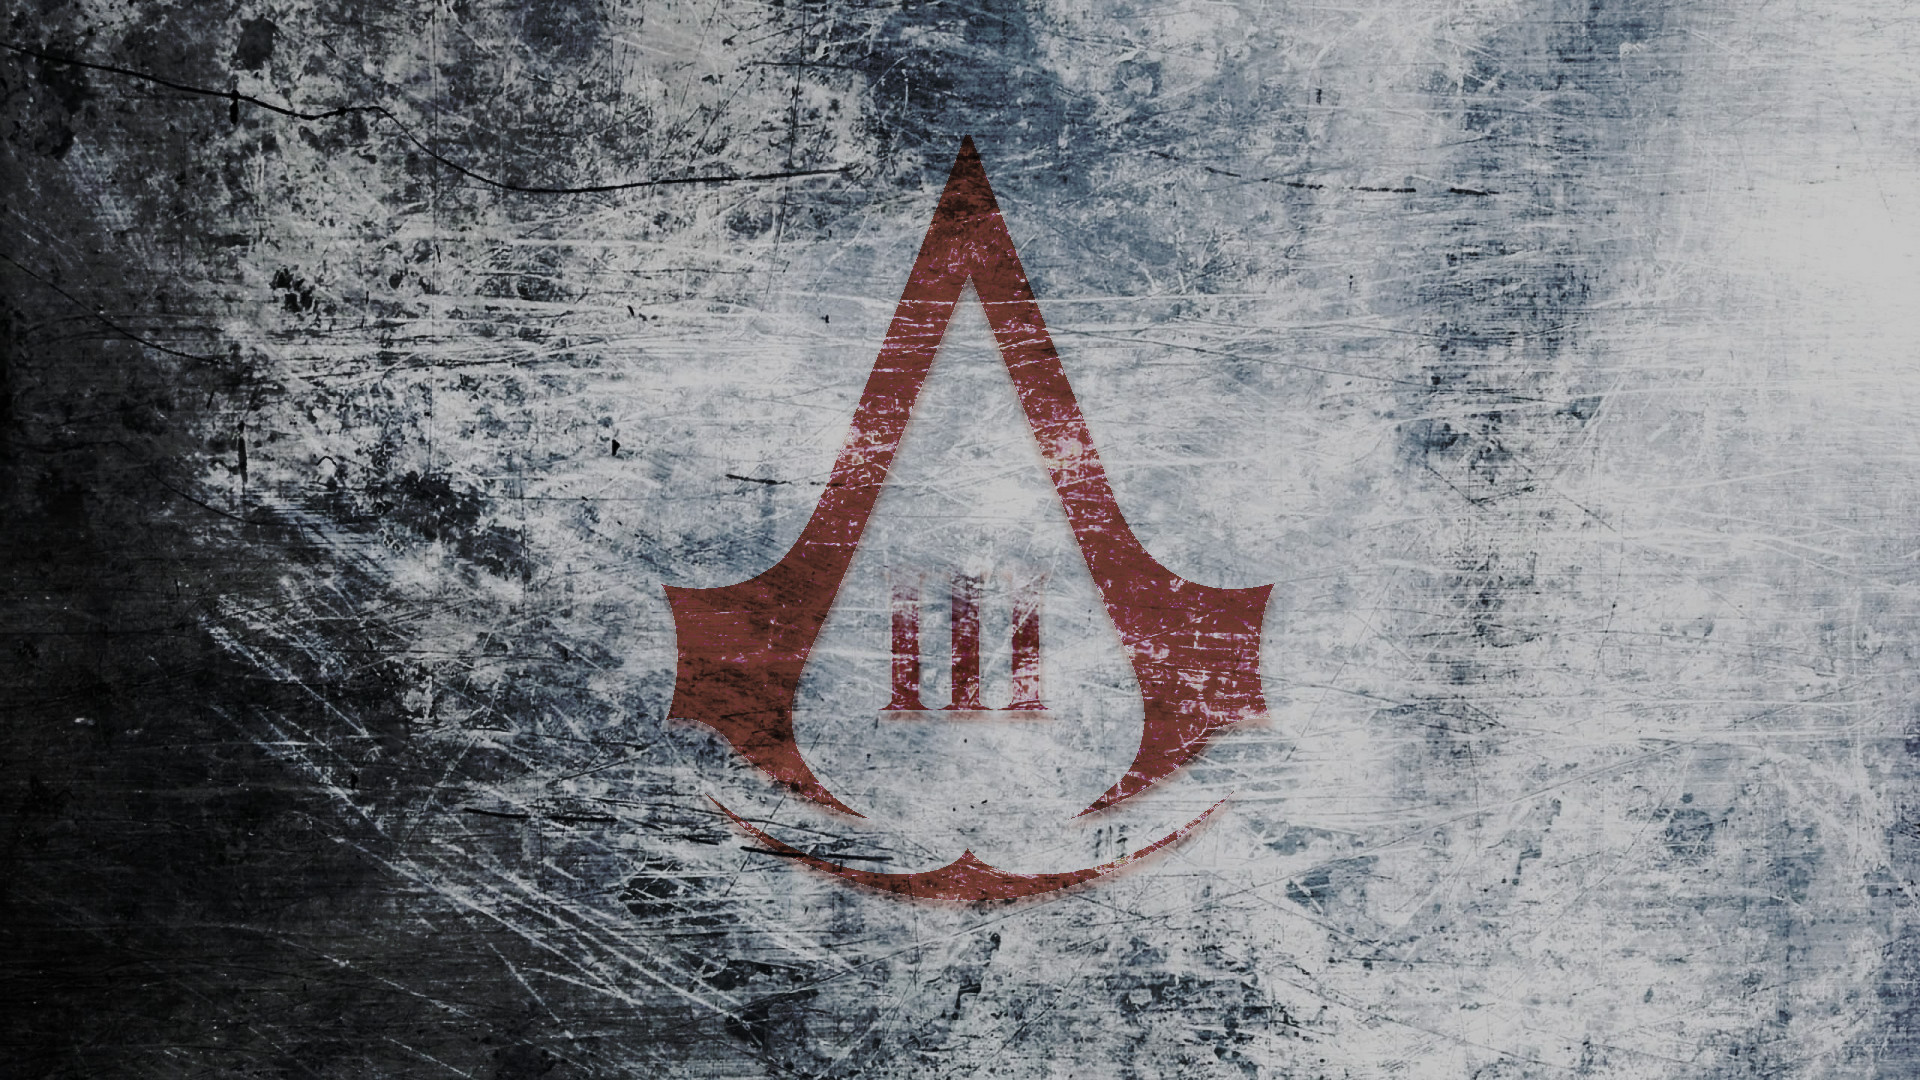 1920x1080 Assassin's creed 3 wallpaper  by cain592 Assassin's creed 3  wallpaper  by cain592